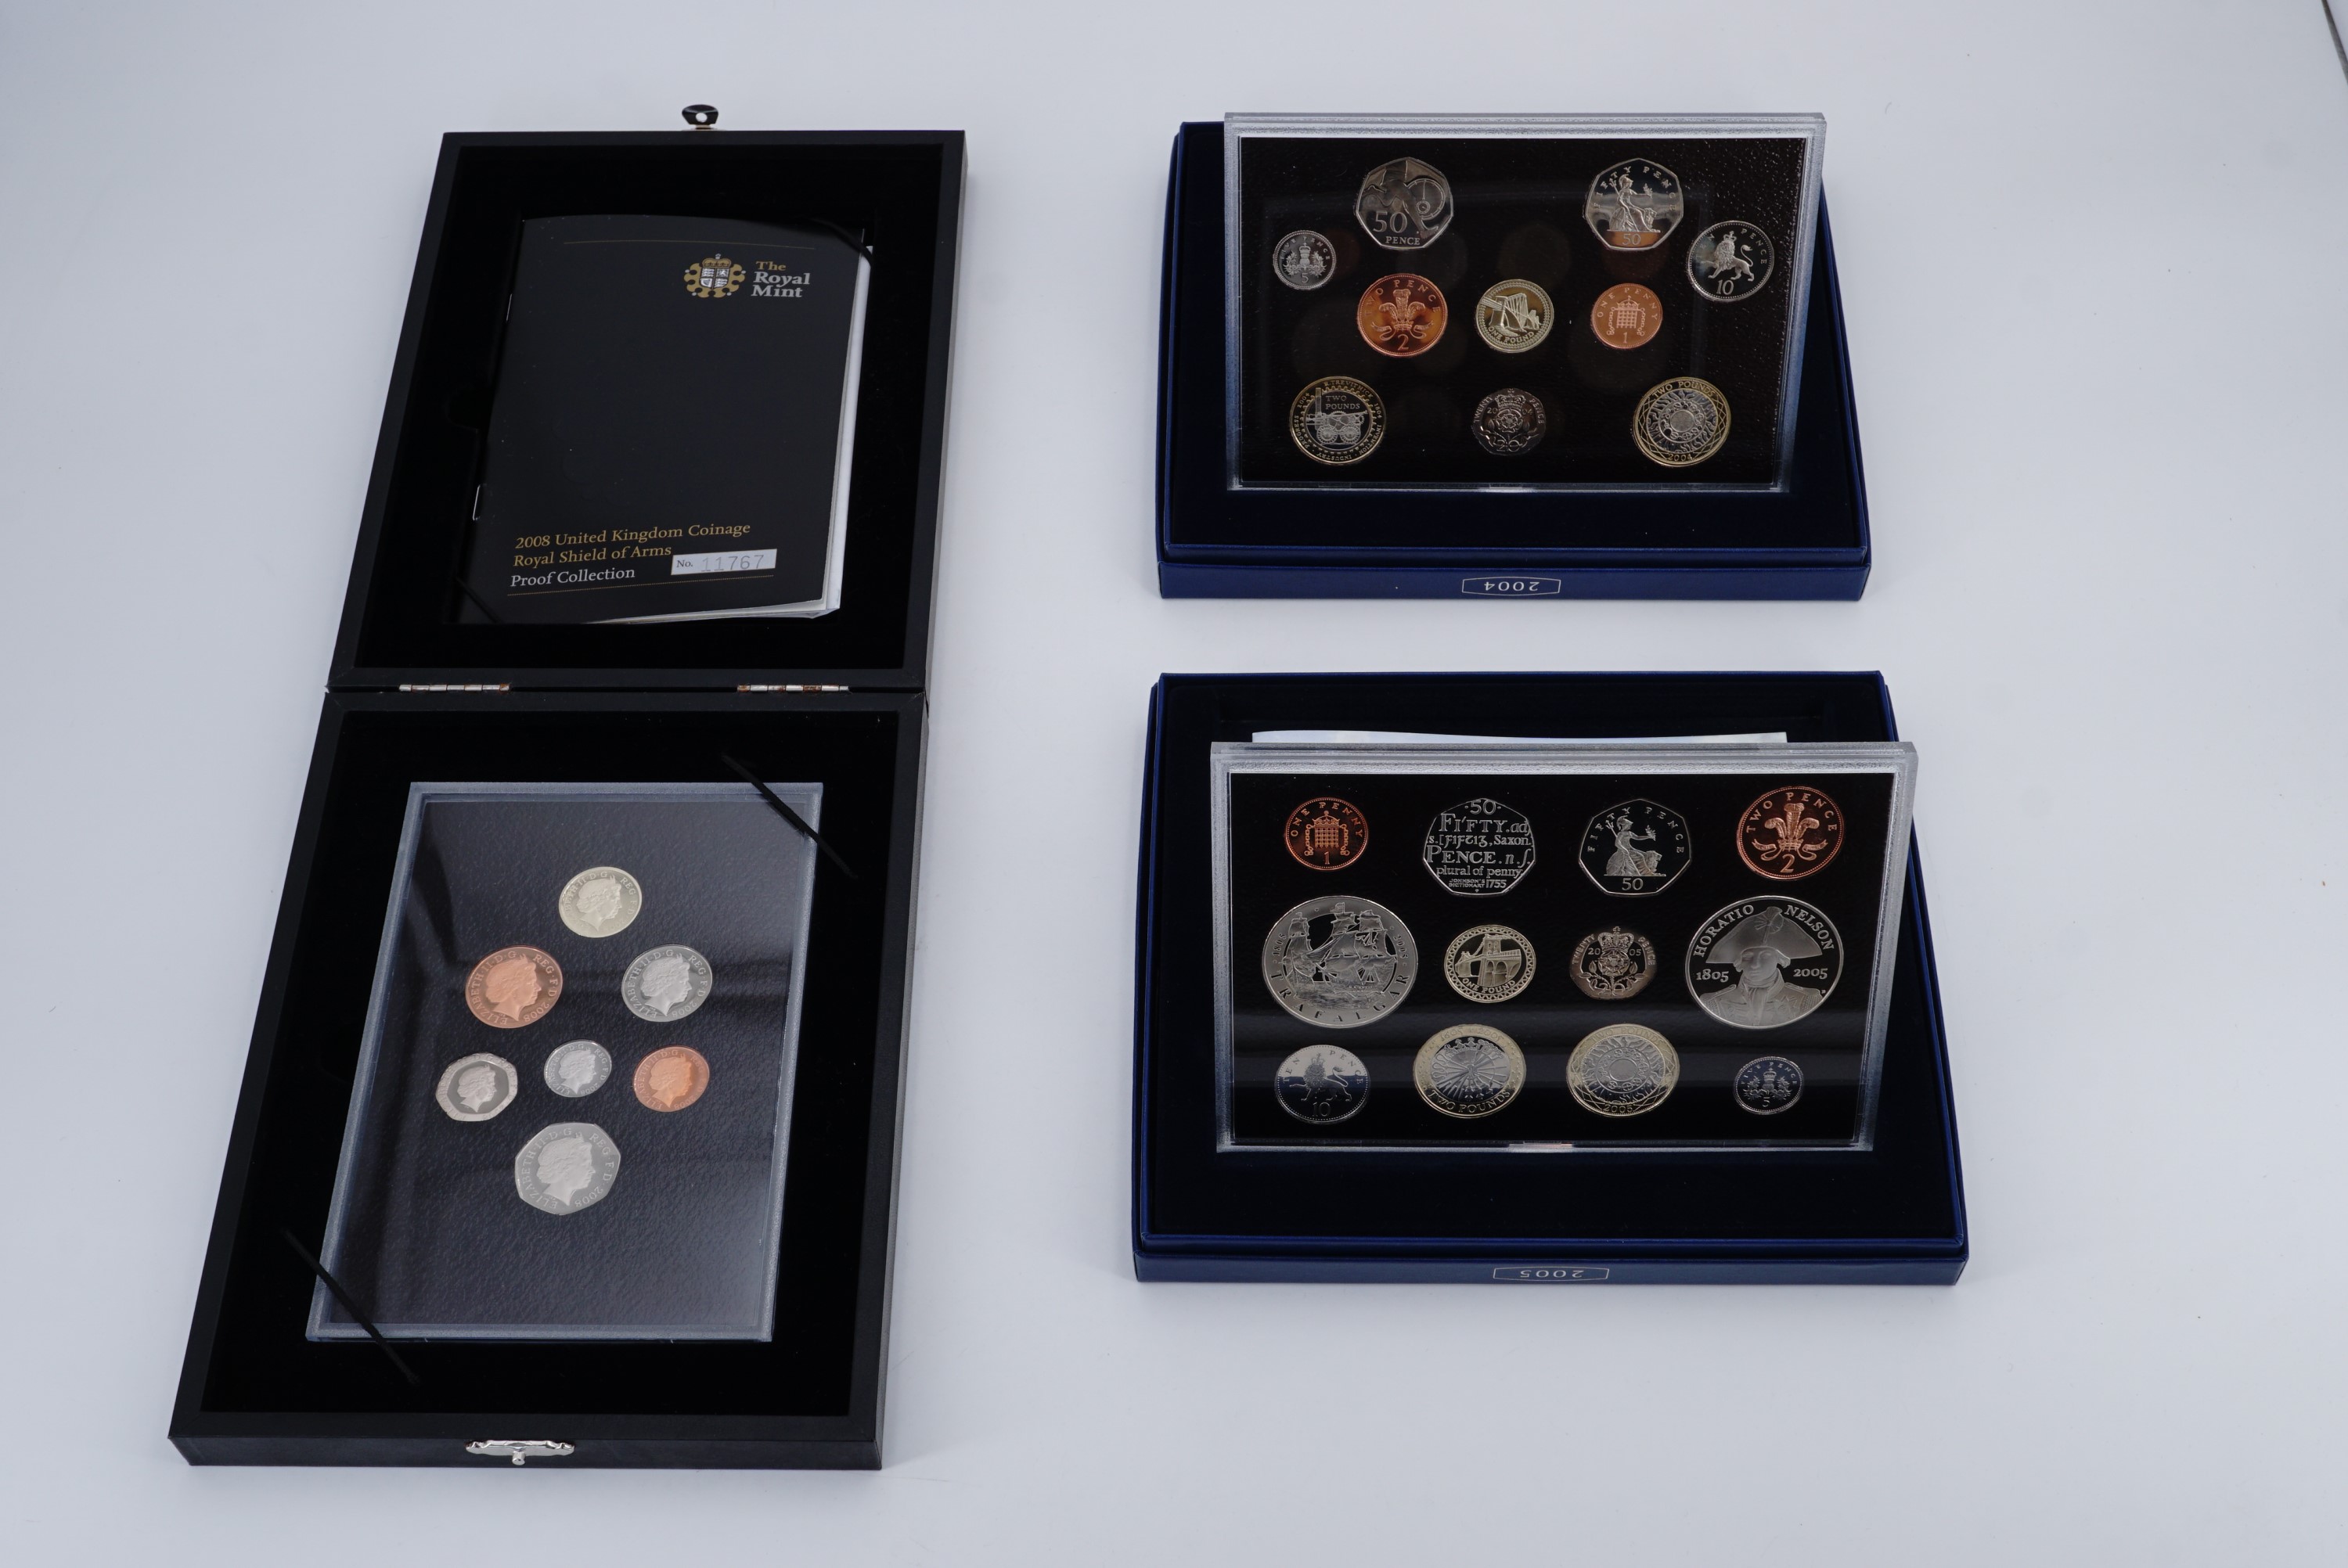 Two Royal Mint United Kingdom Proof Coin Sets, for the years 2004 and 2005, with original